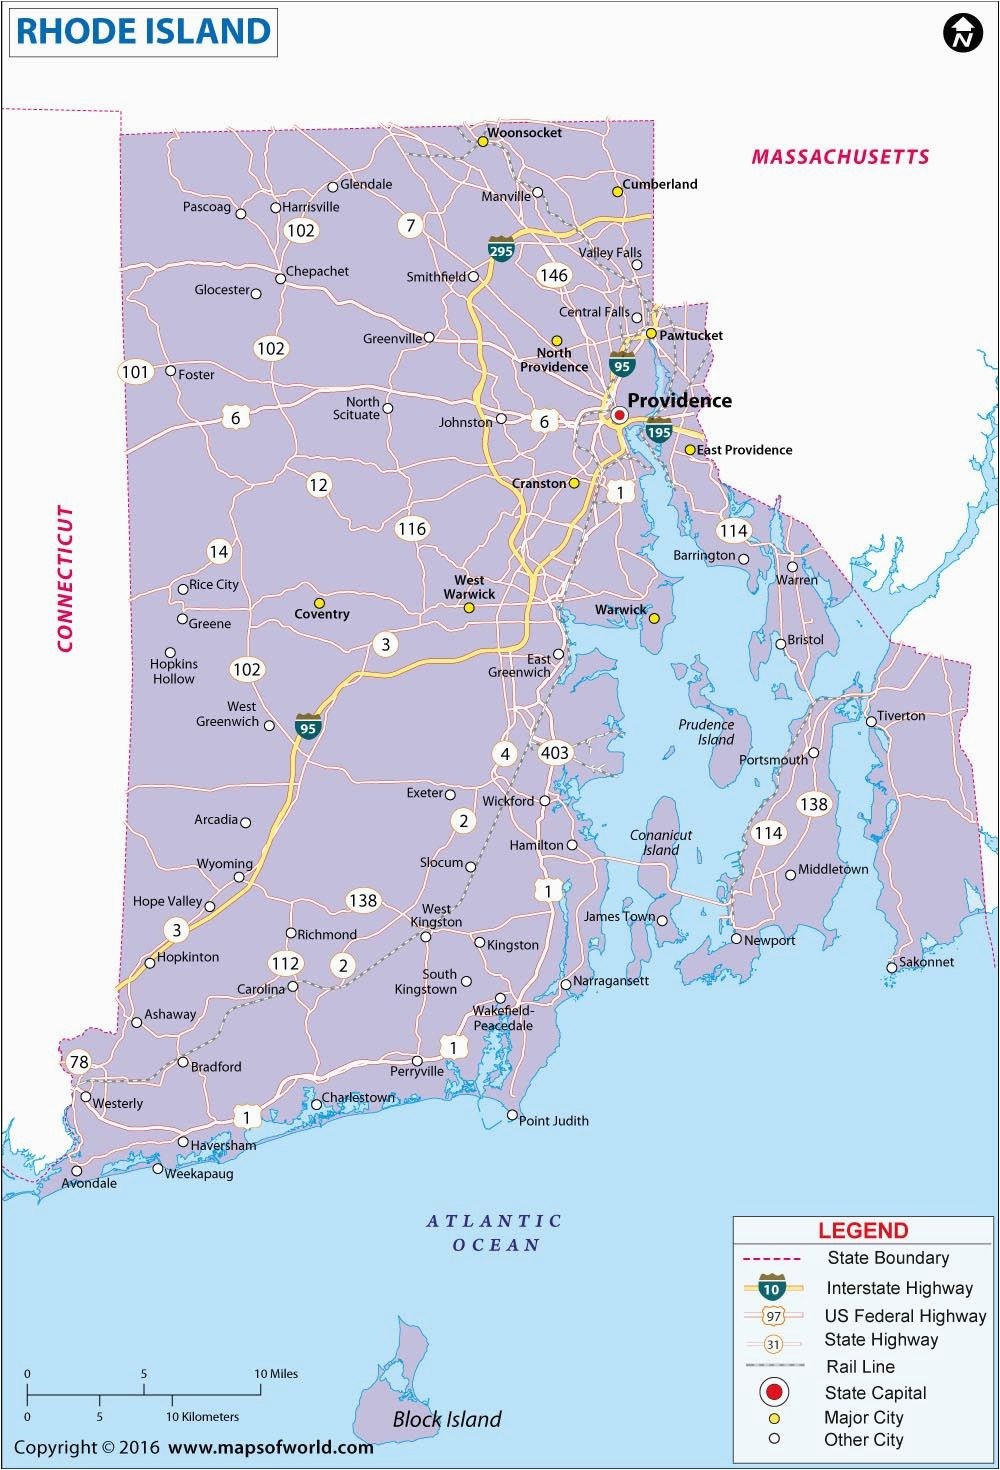 image result for rhode island fifty states rhode island us map